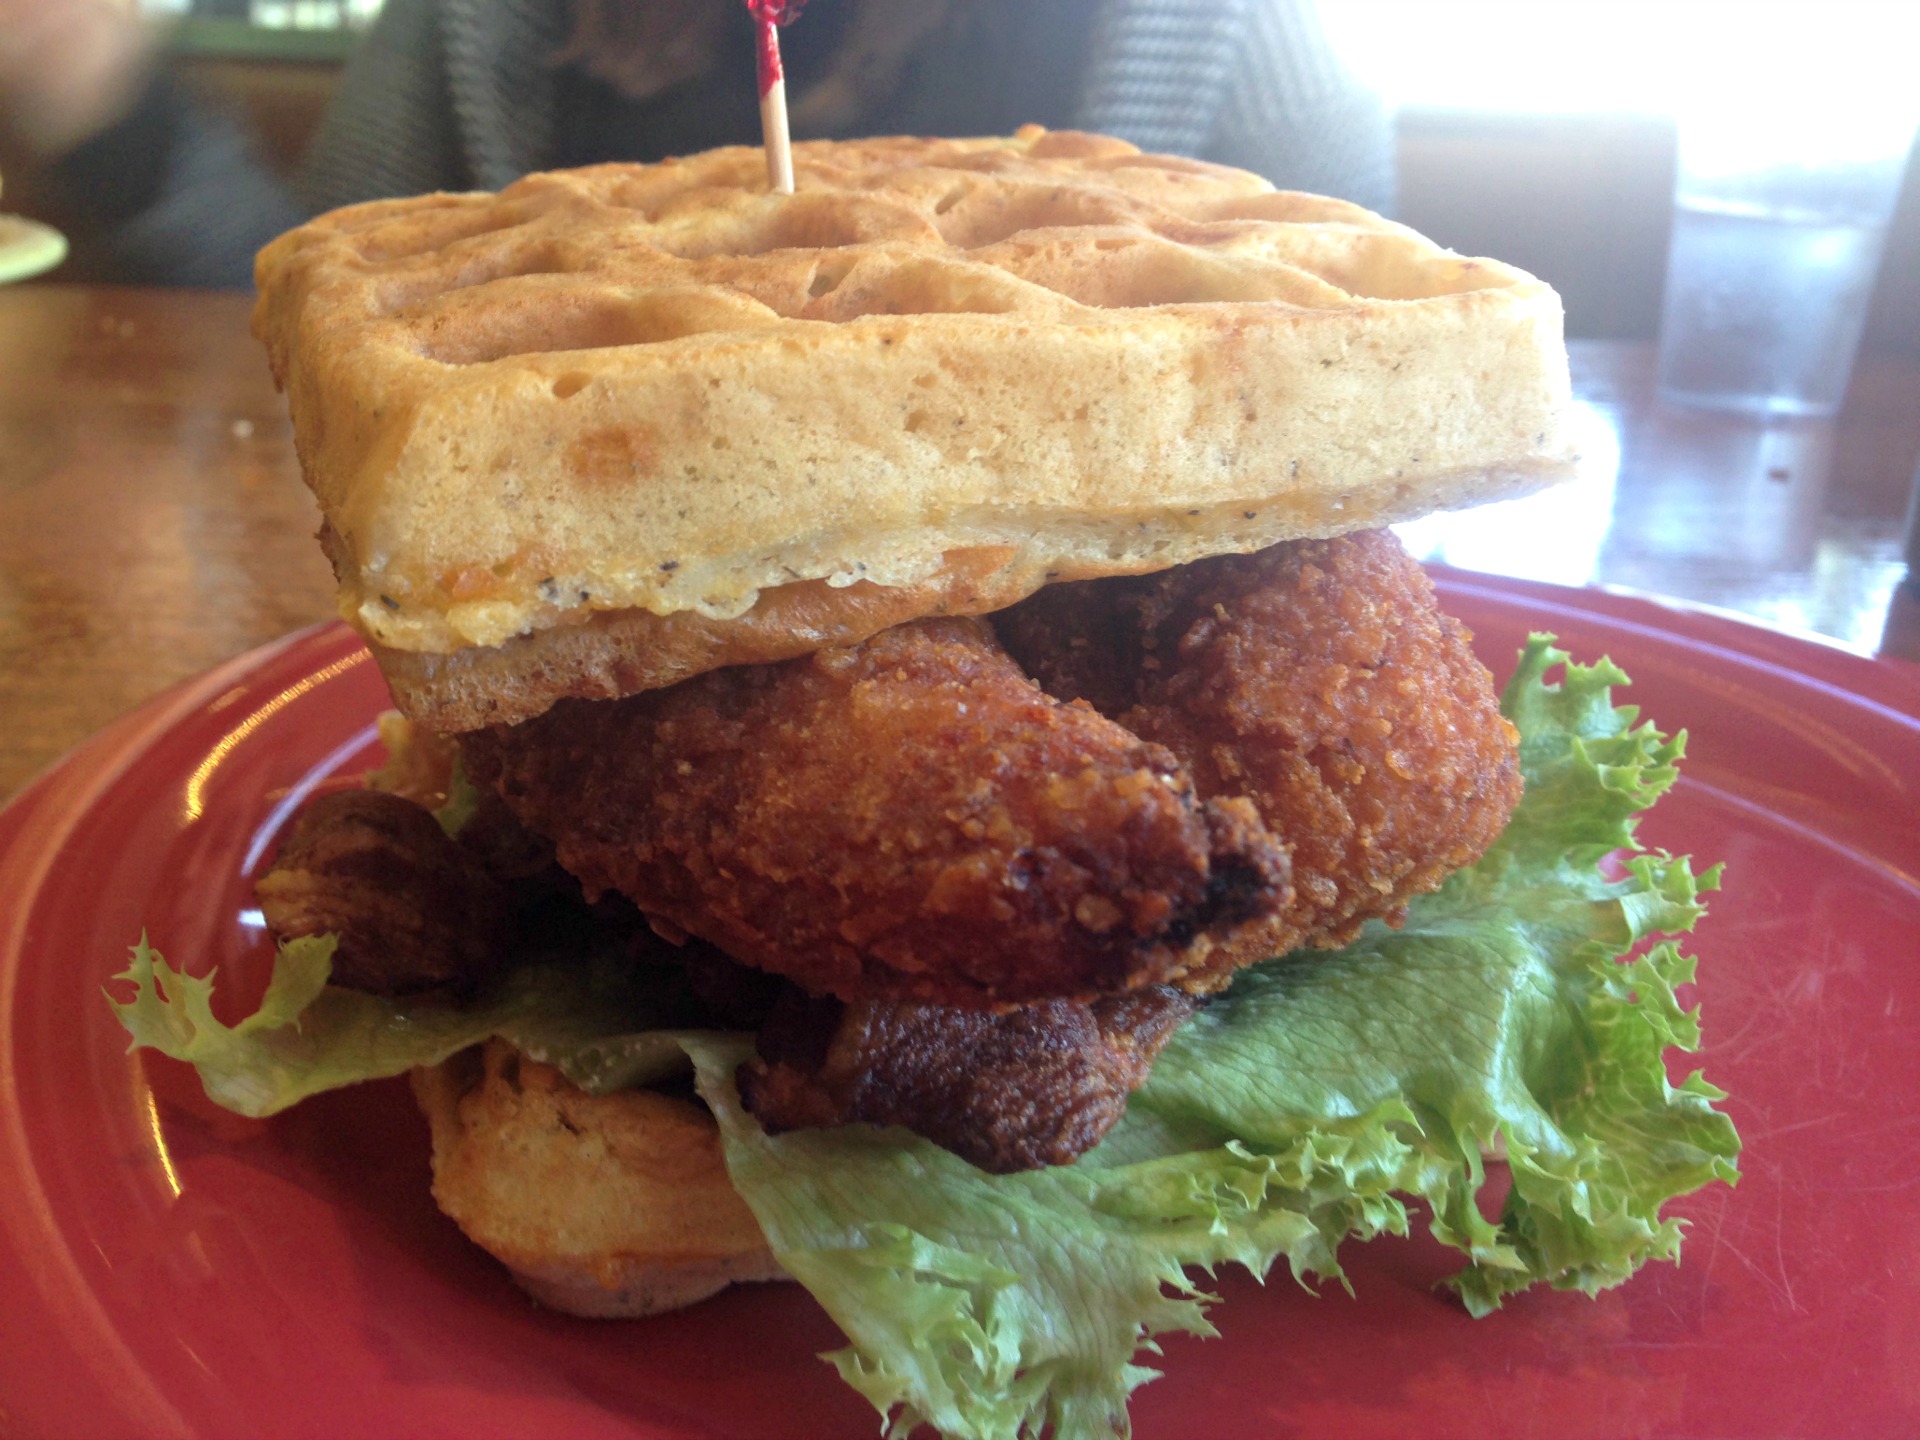 A chicken and waffle sandwich from Lola's.